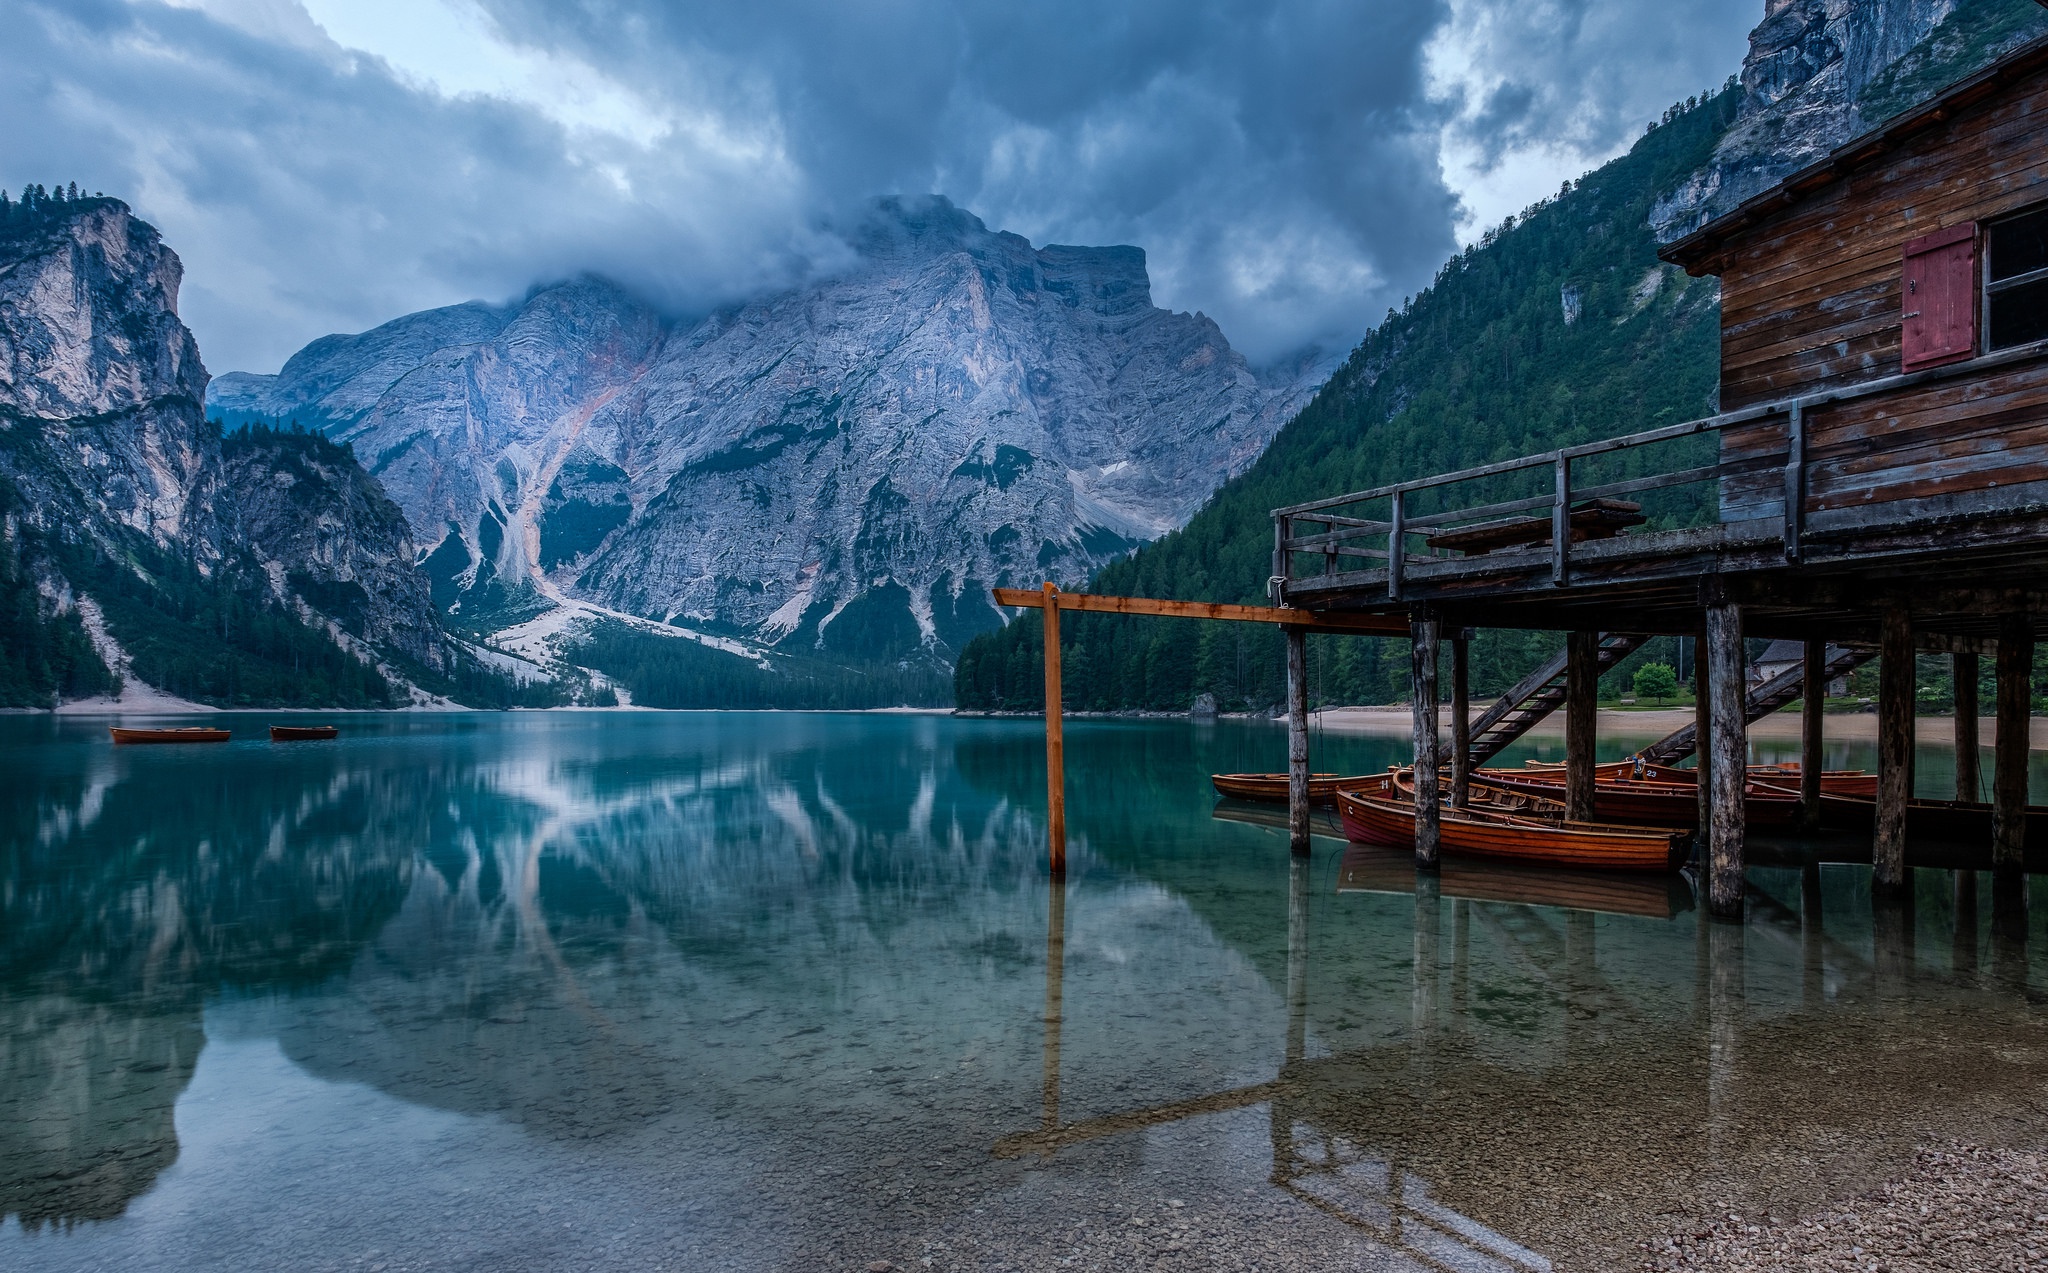 General 2048x1273 mountains reflection nature water lake boat Pragser Wildsee stairs wood trees clouds overcast